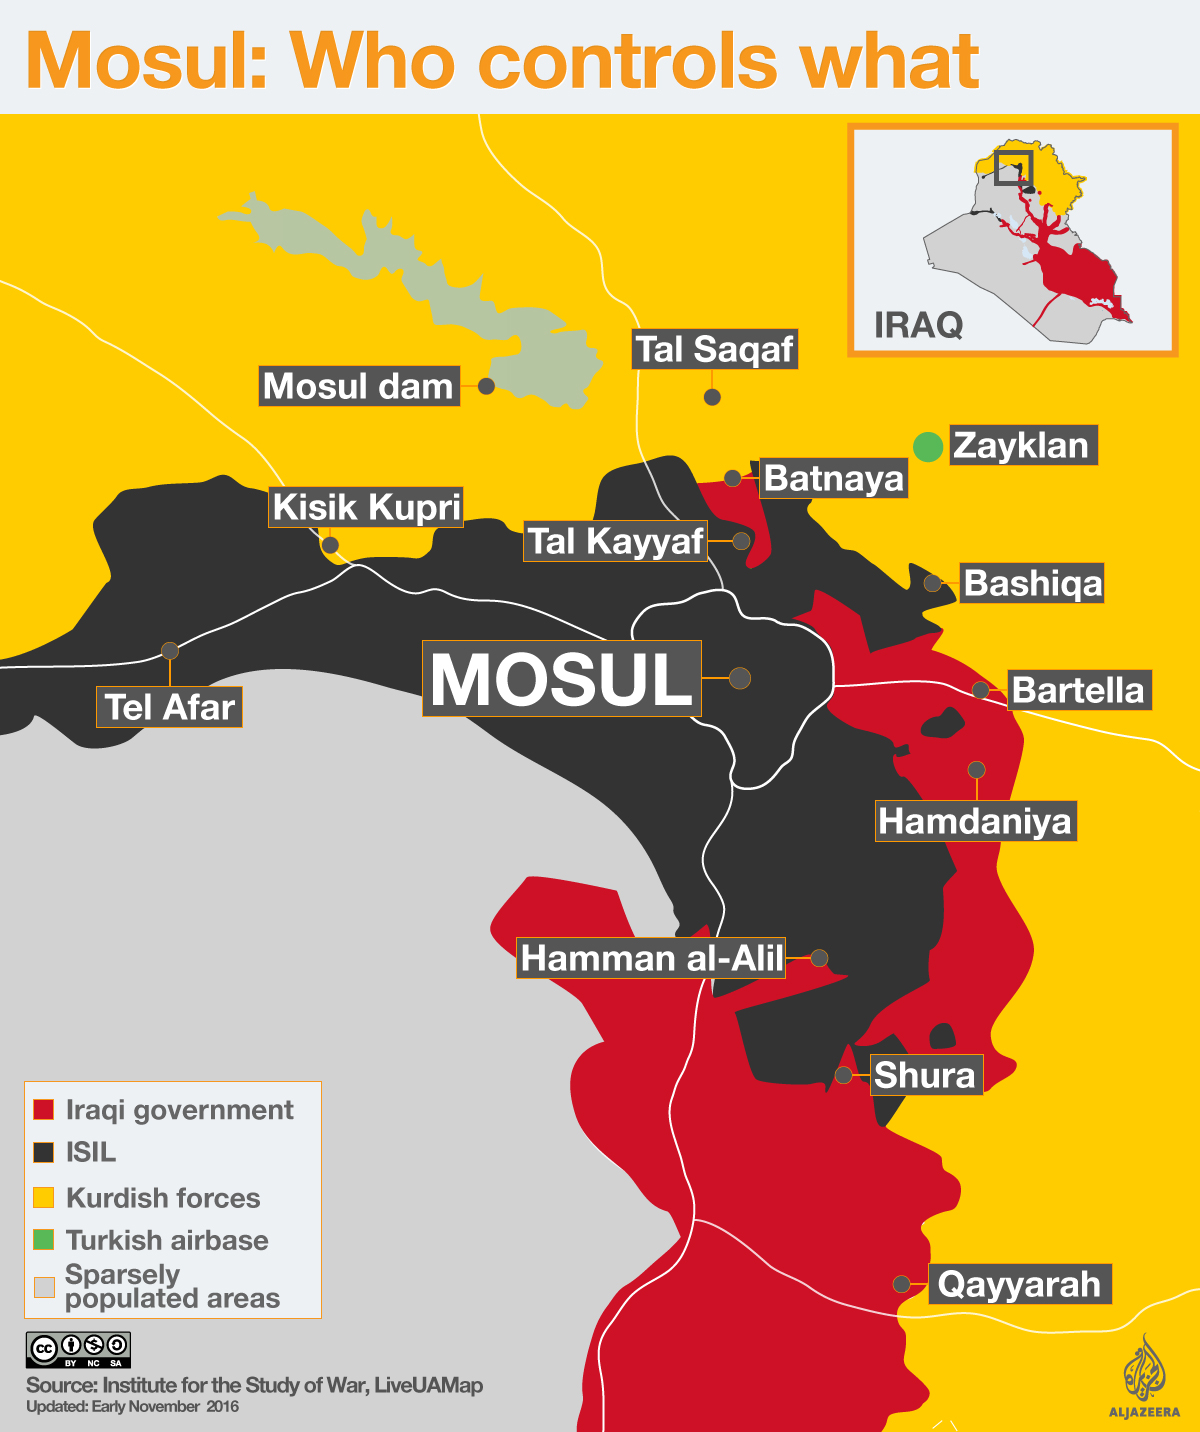 Mosul Nov 6 war map who controls what [Daylife]